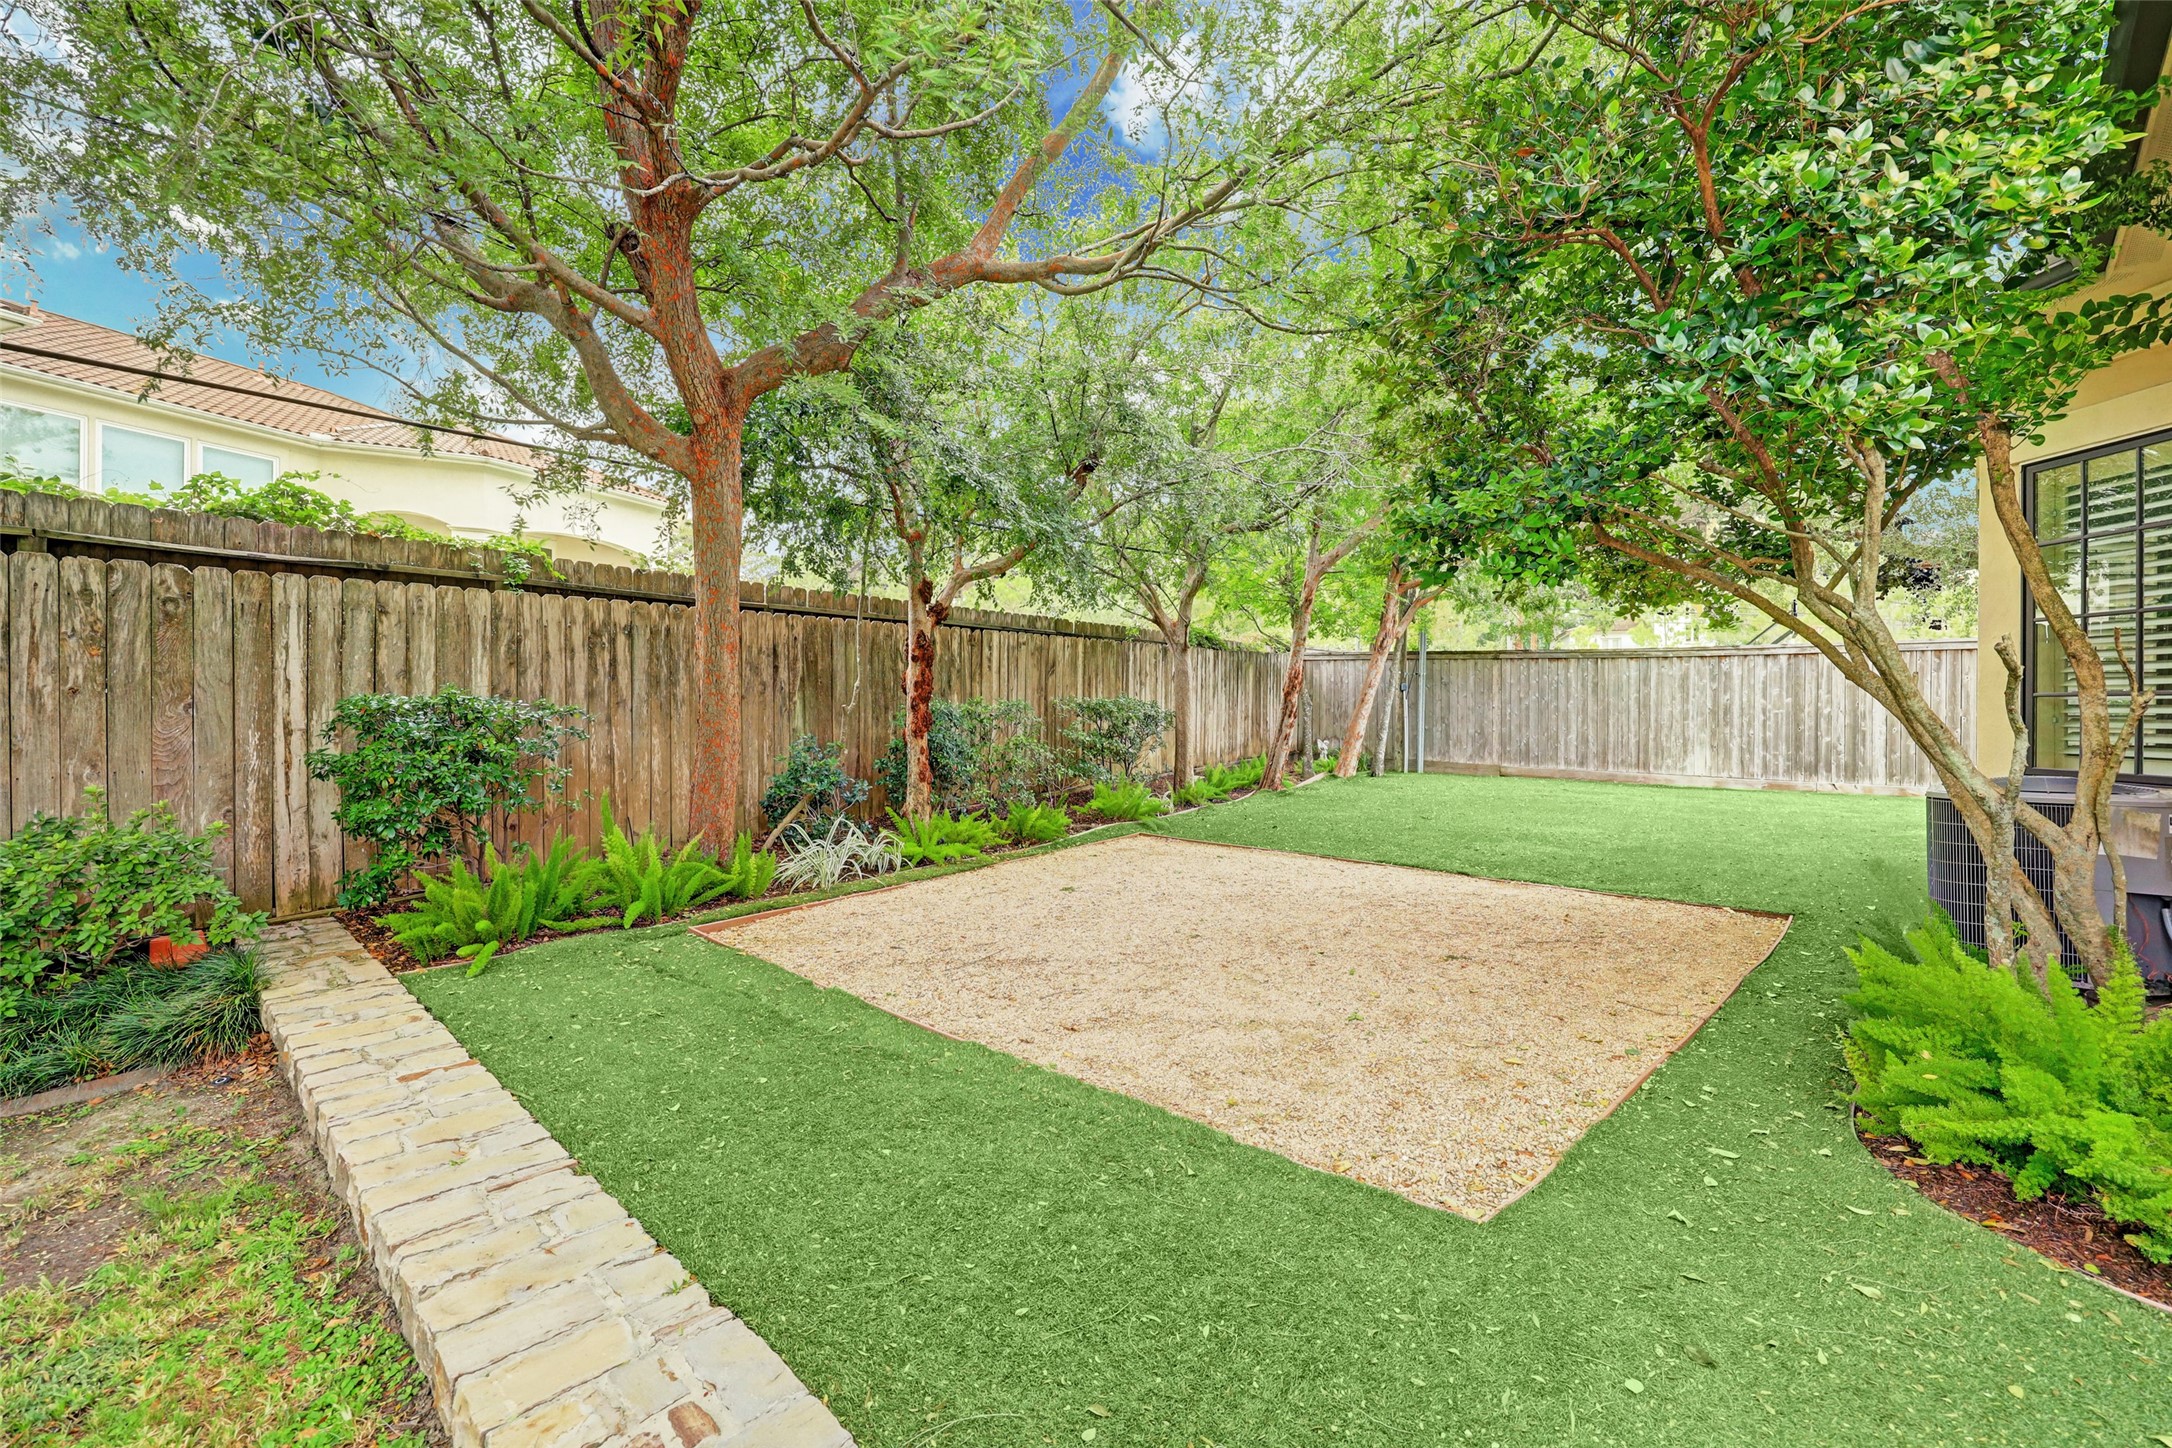 Behind the Casita is a spot for a Playscape, Bocce court, or Putting Green.